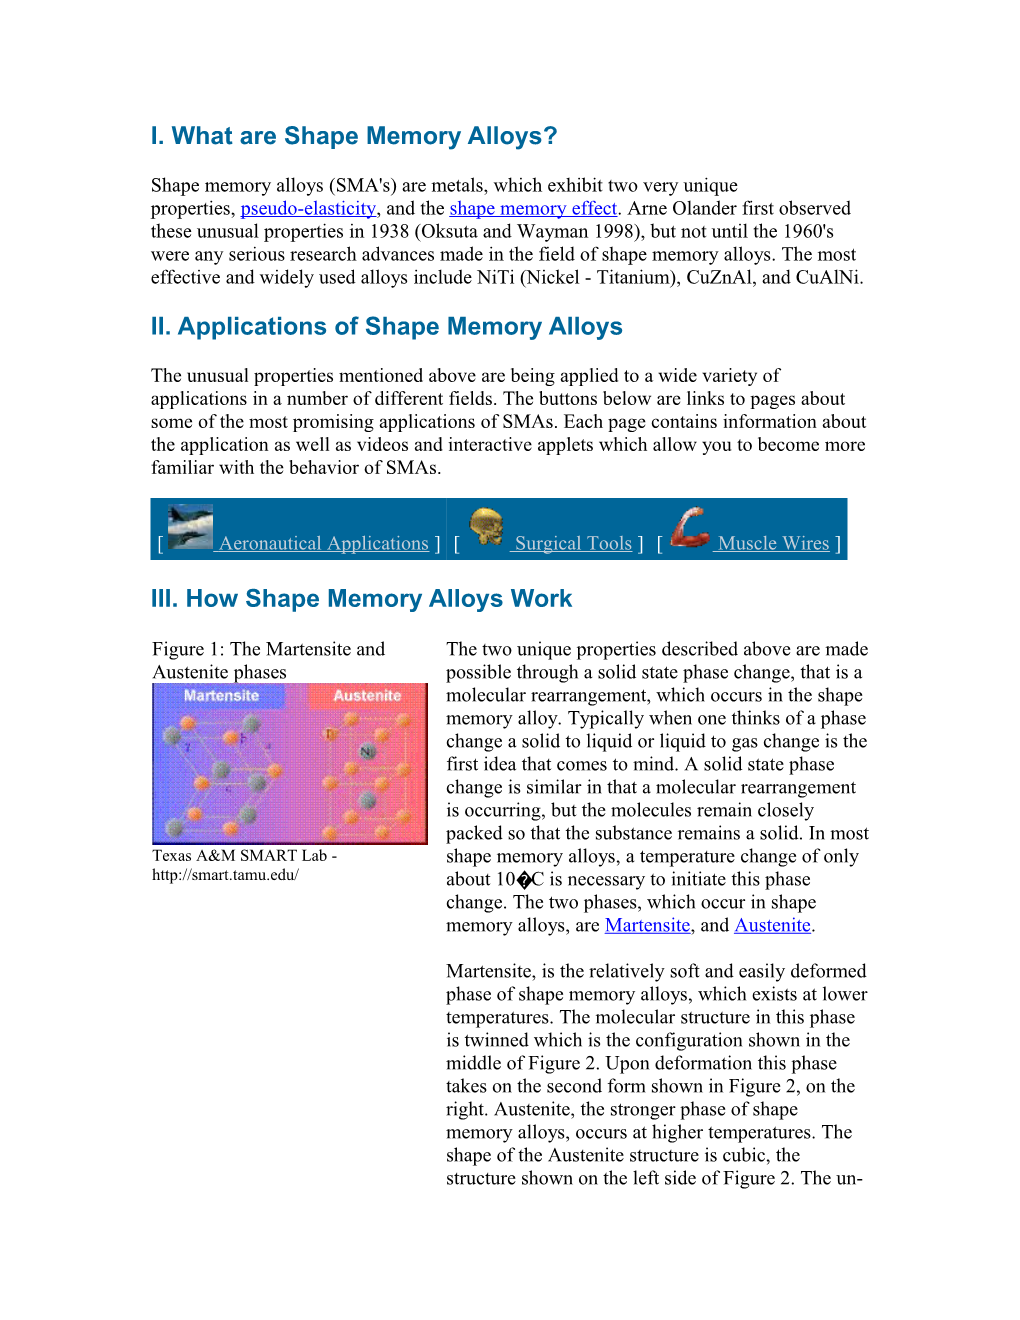 I. What Are Shape Memory Alloys?